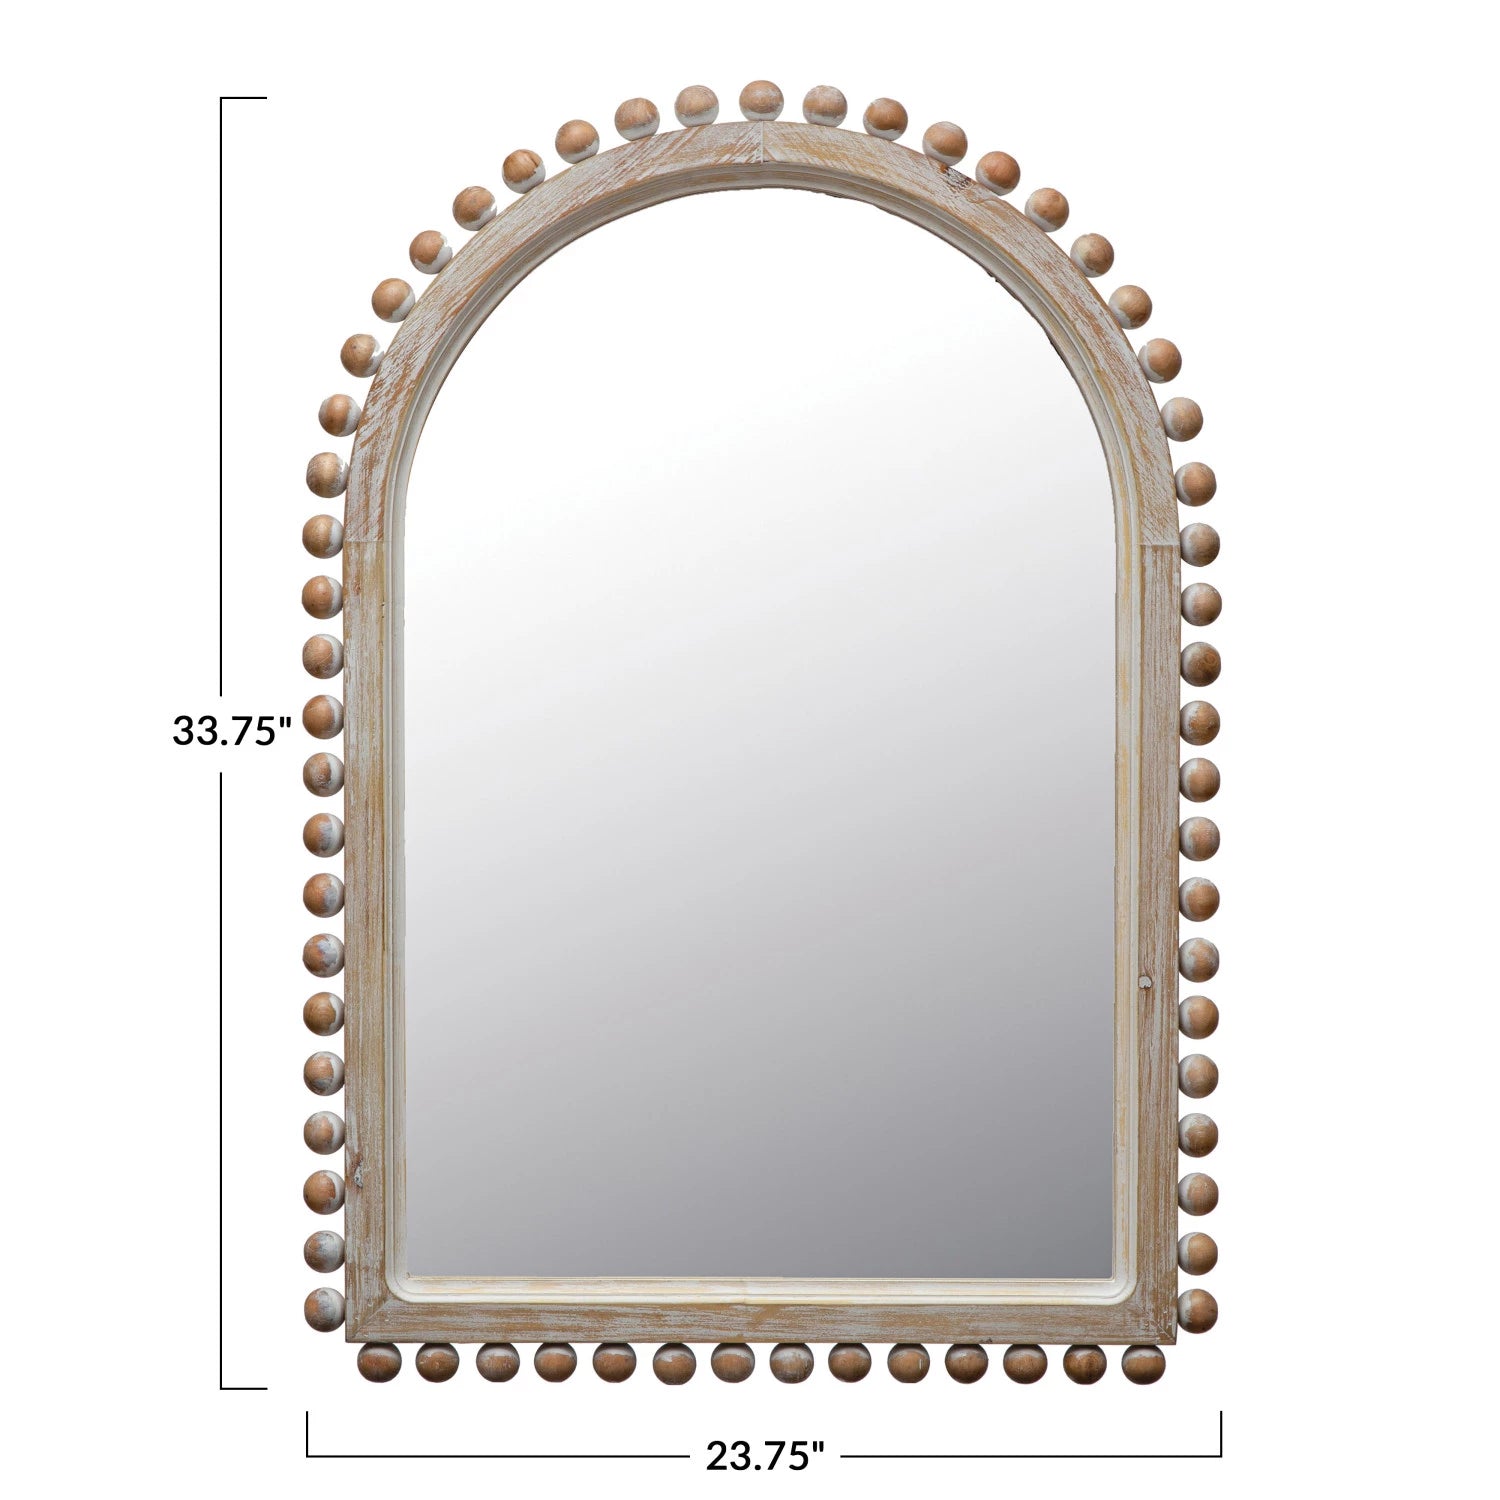 Natural Wood Ball Framed Arched Wall Mirror